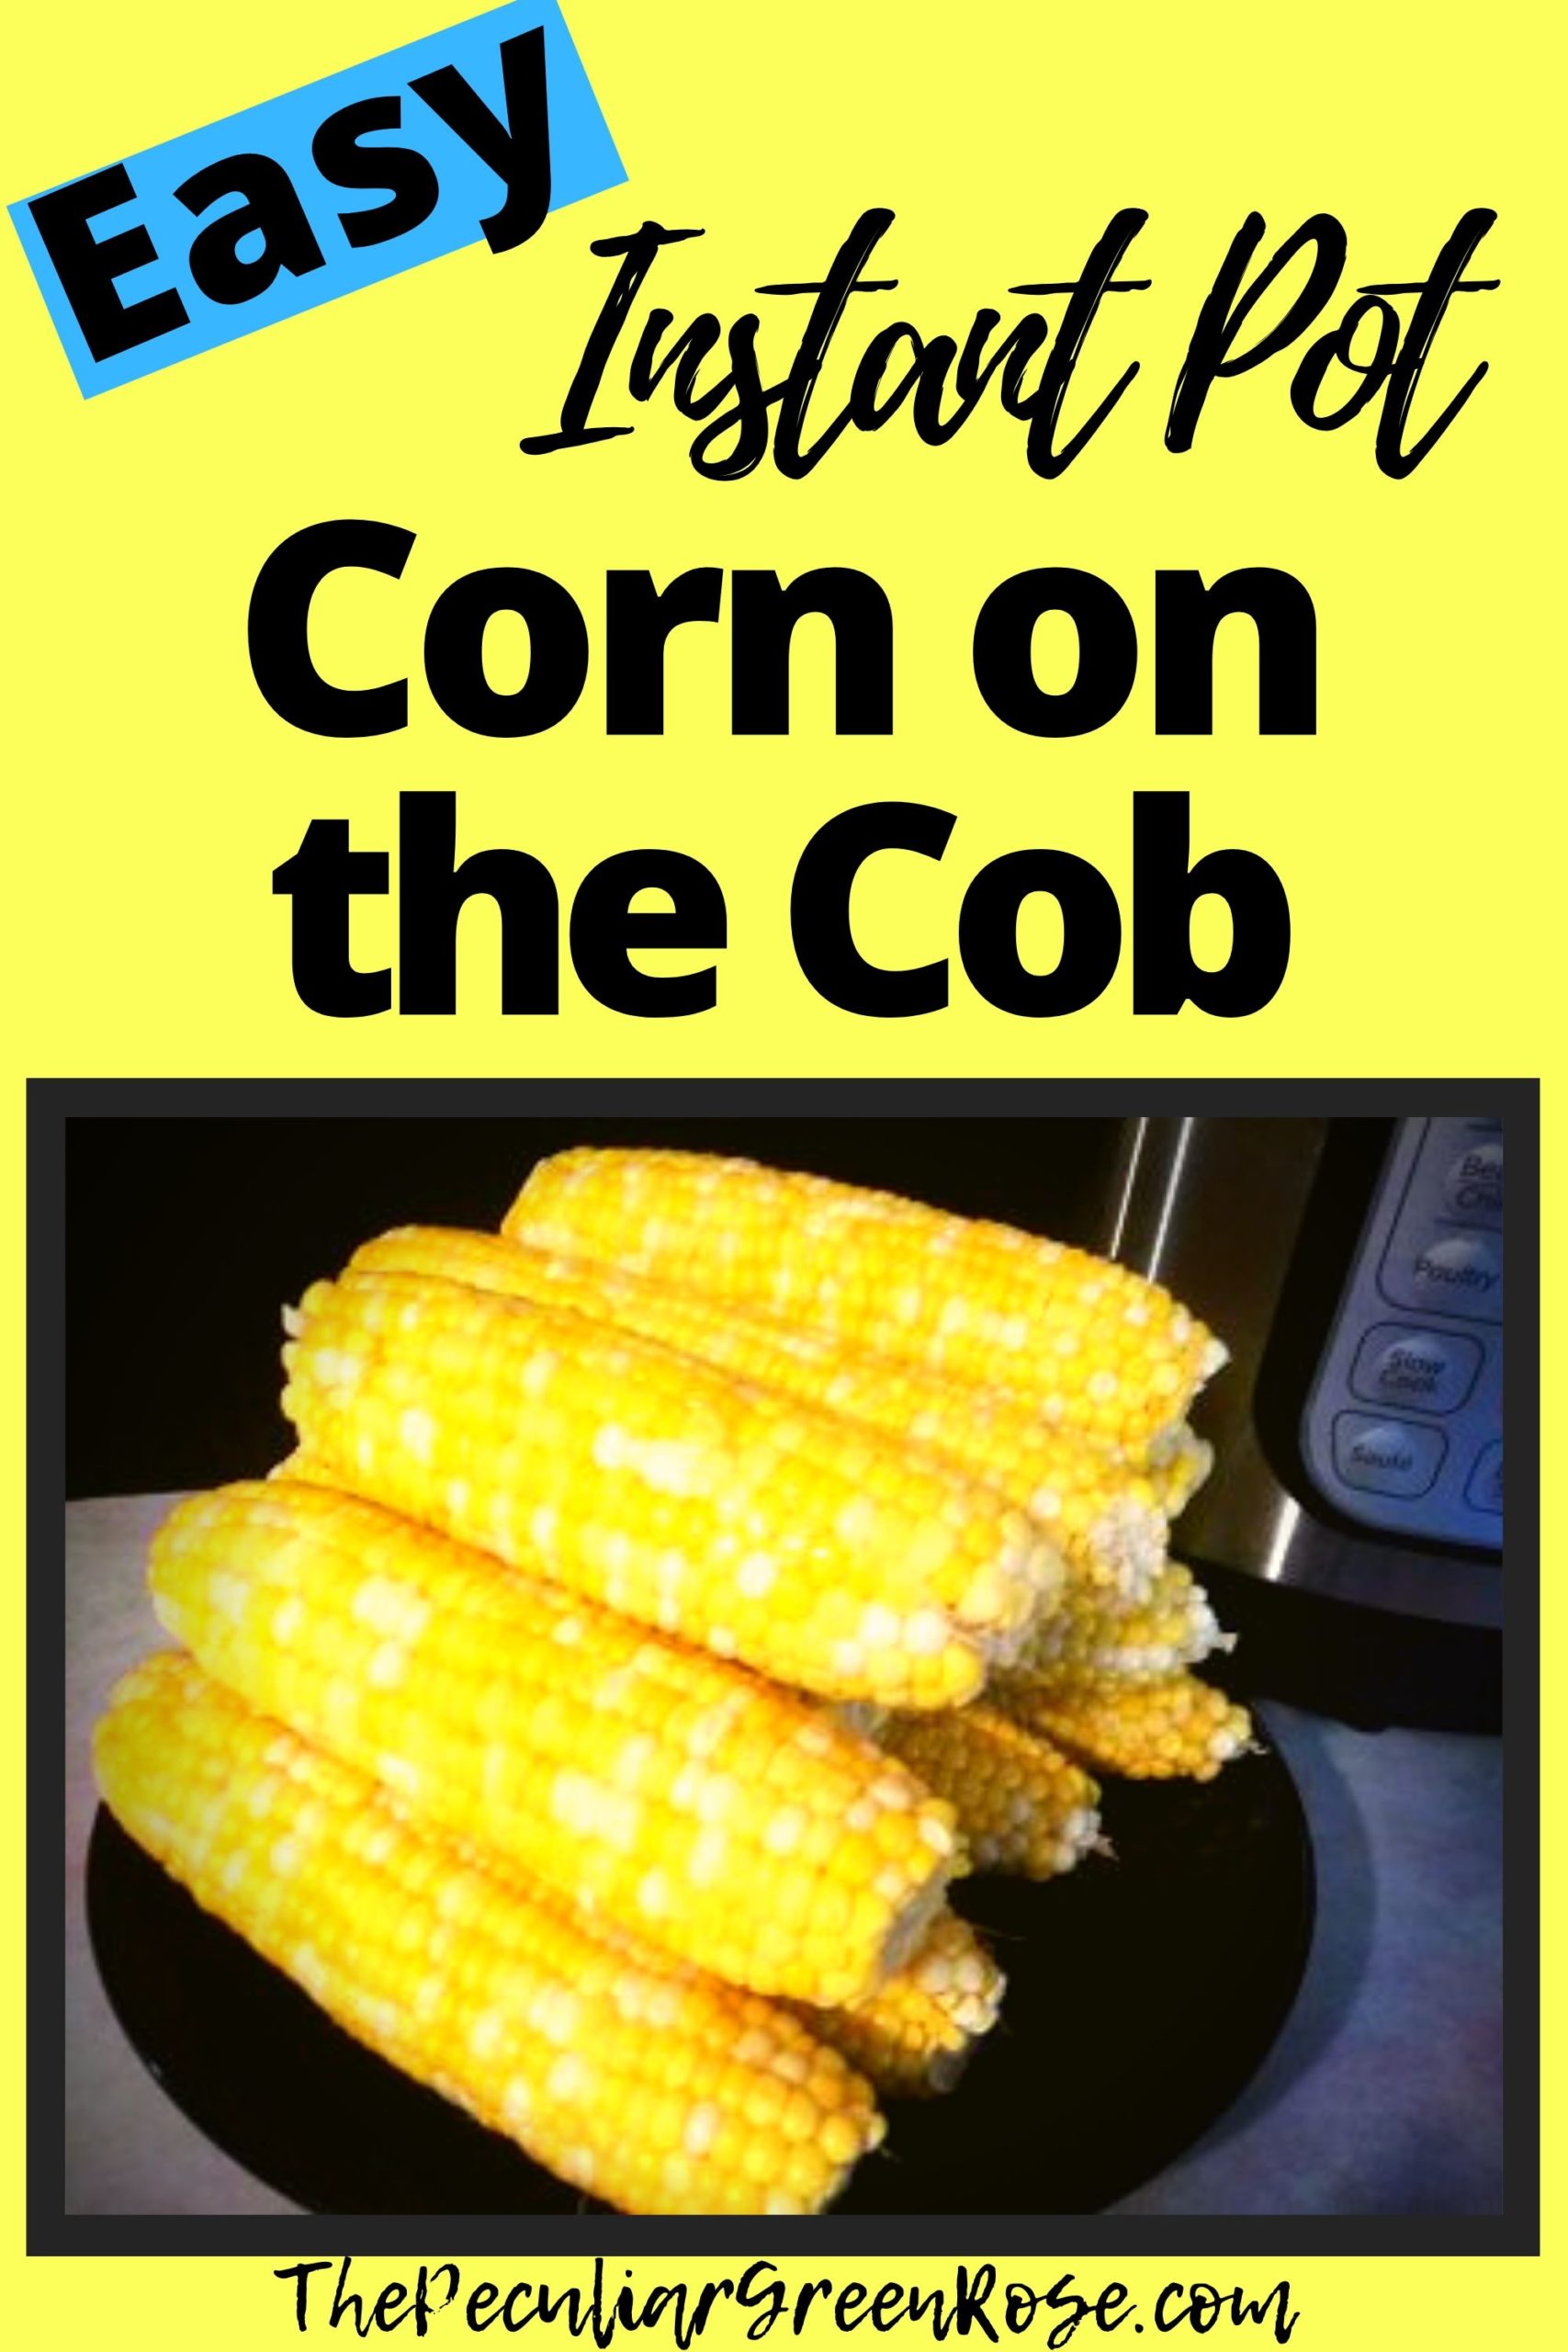 A black plate with steamed corn on the cob resting on a counter in front of an Instant Pot.